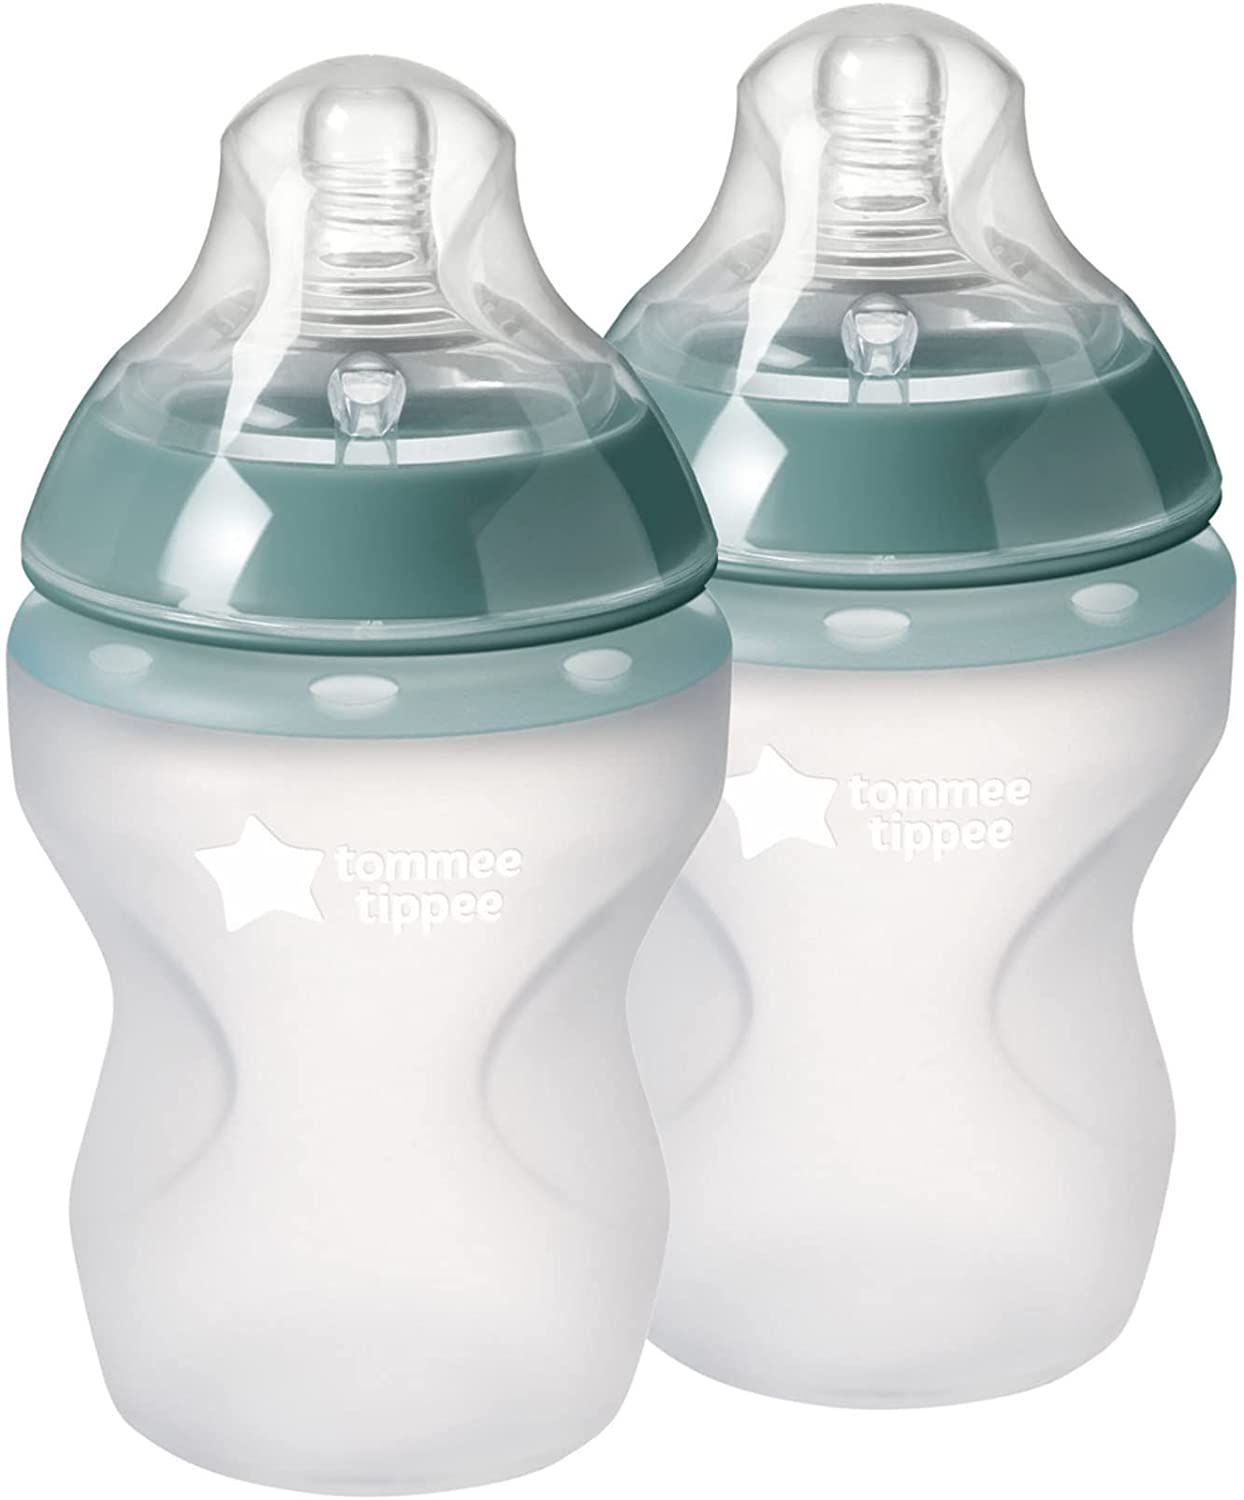 Tommee Tippee Closer to Nature Night-time Baby Bottle & Breast